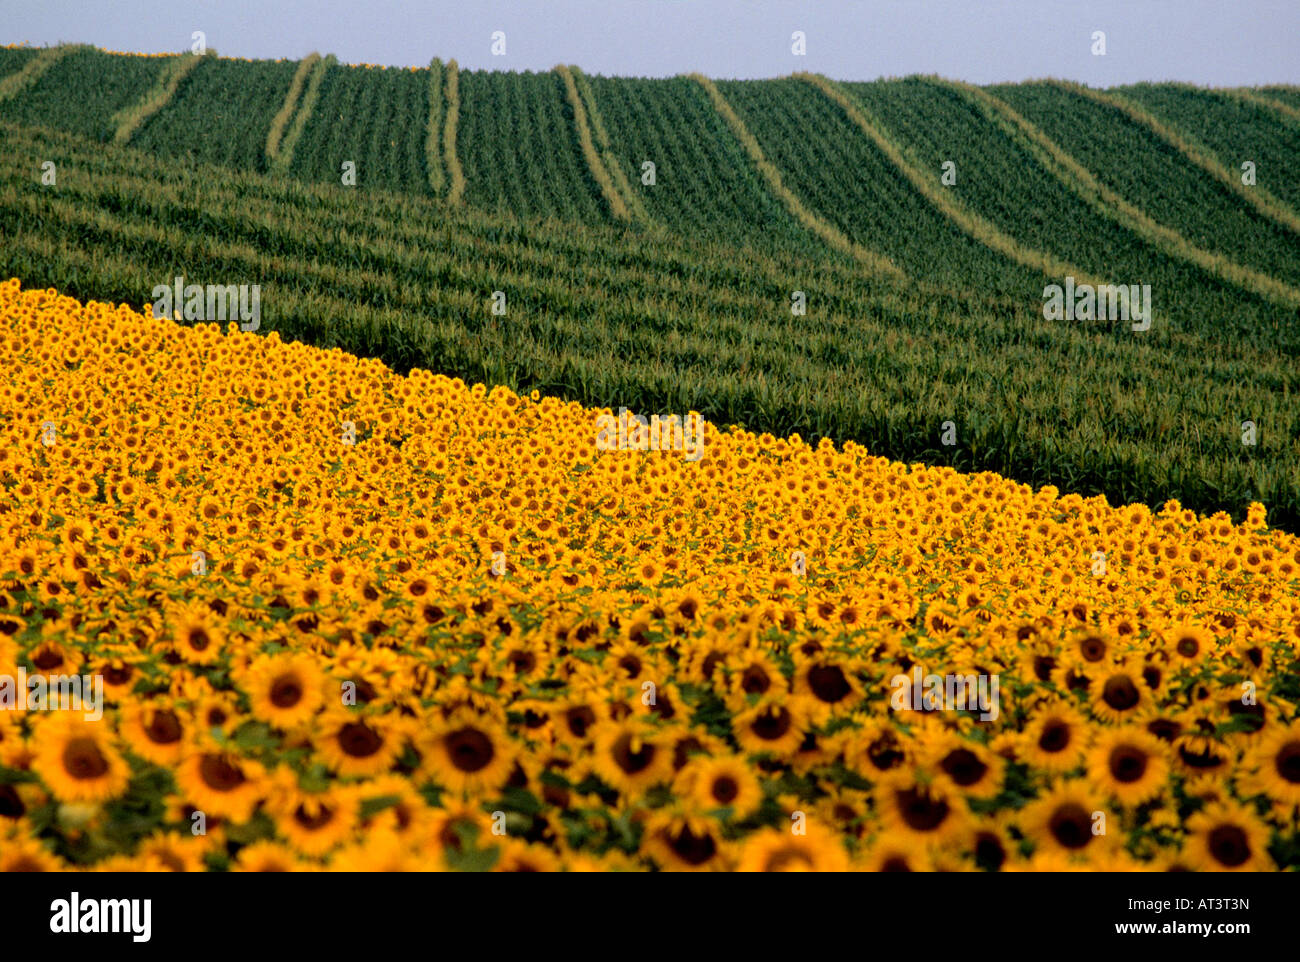 Mixed farming in limagne. France Photo - Alamy